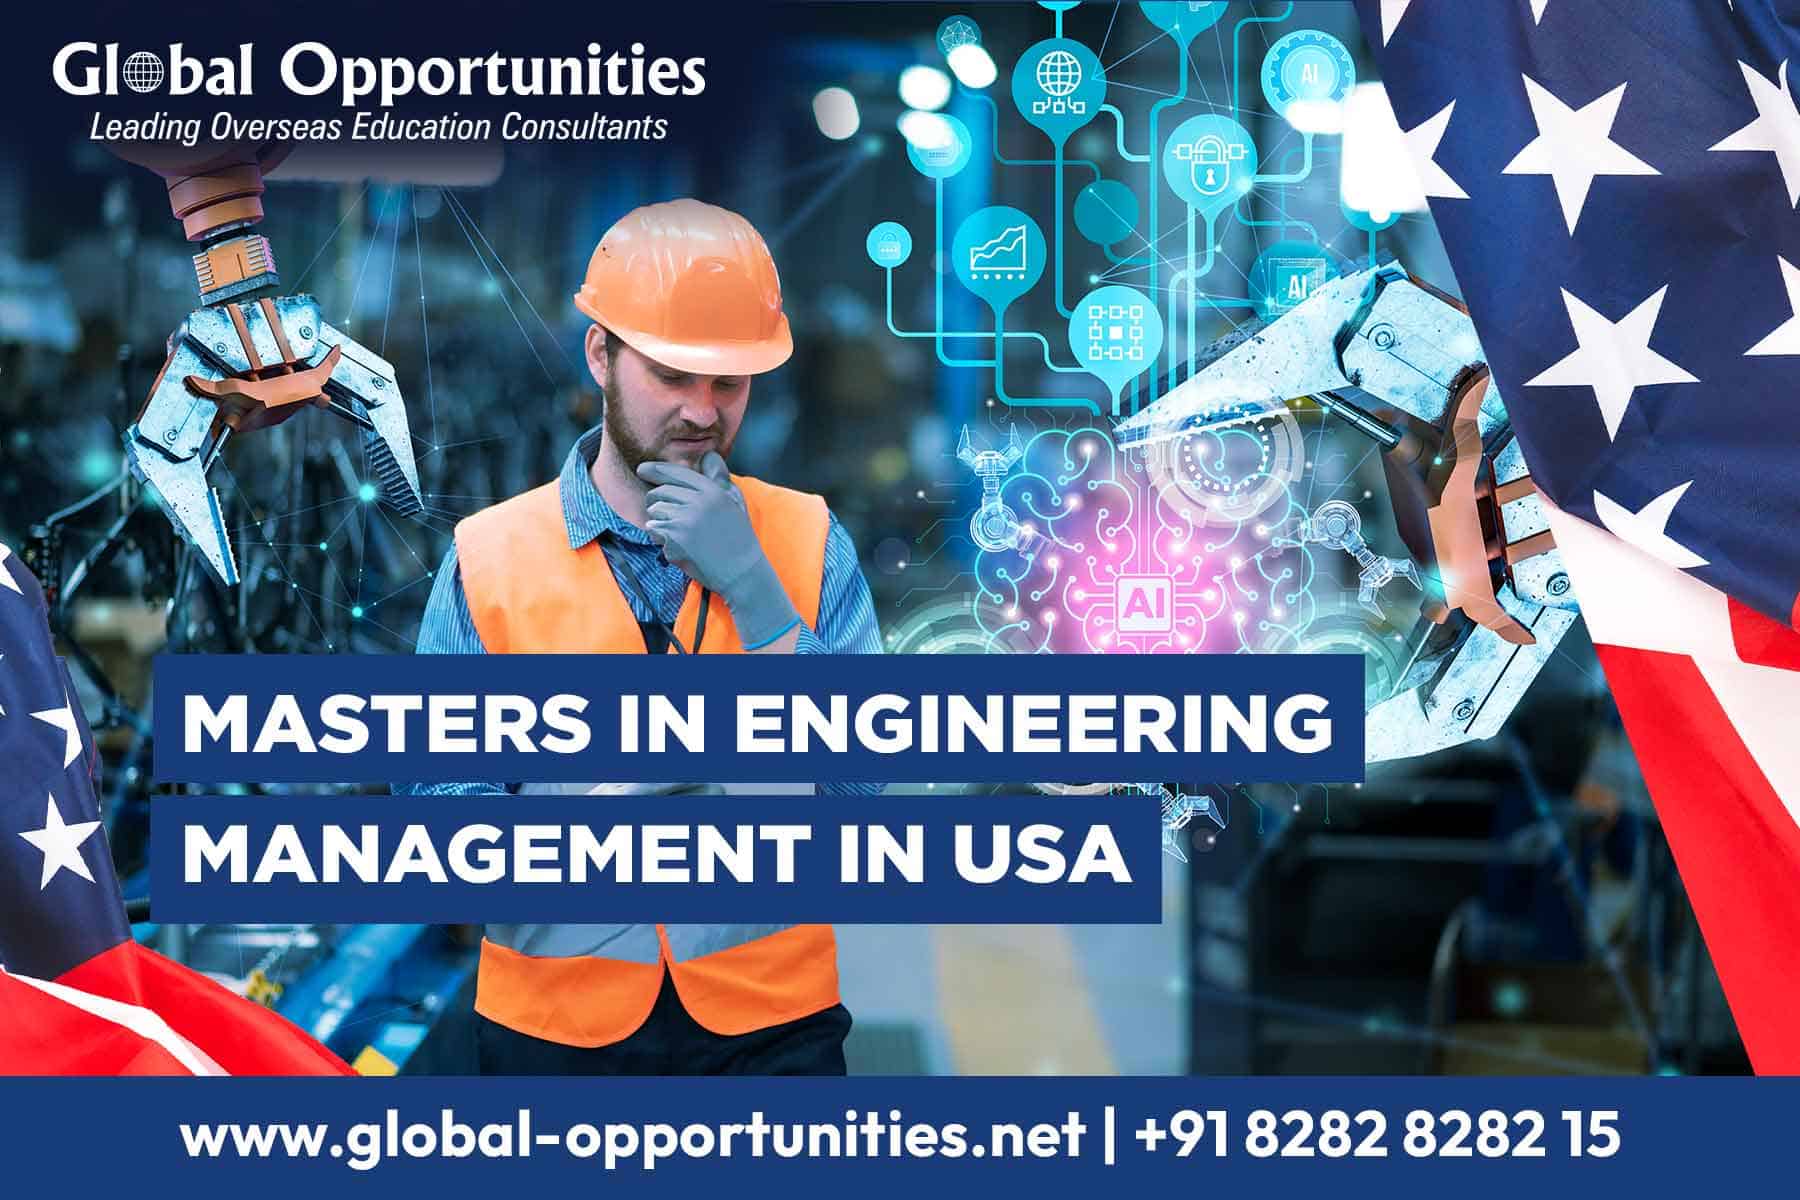 Masters in Engineering Management in the USA